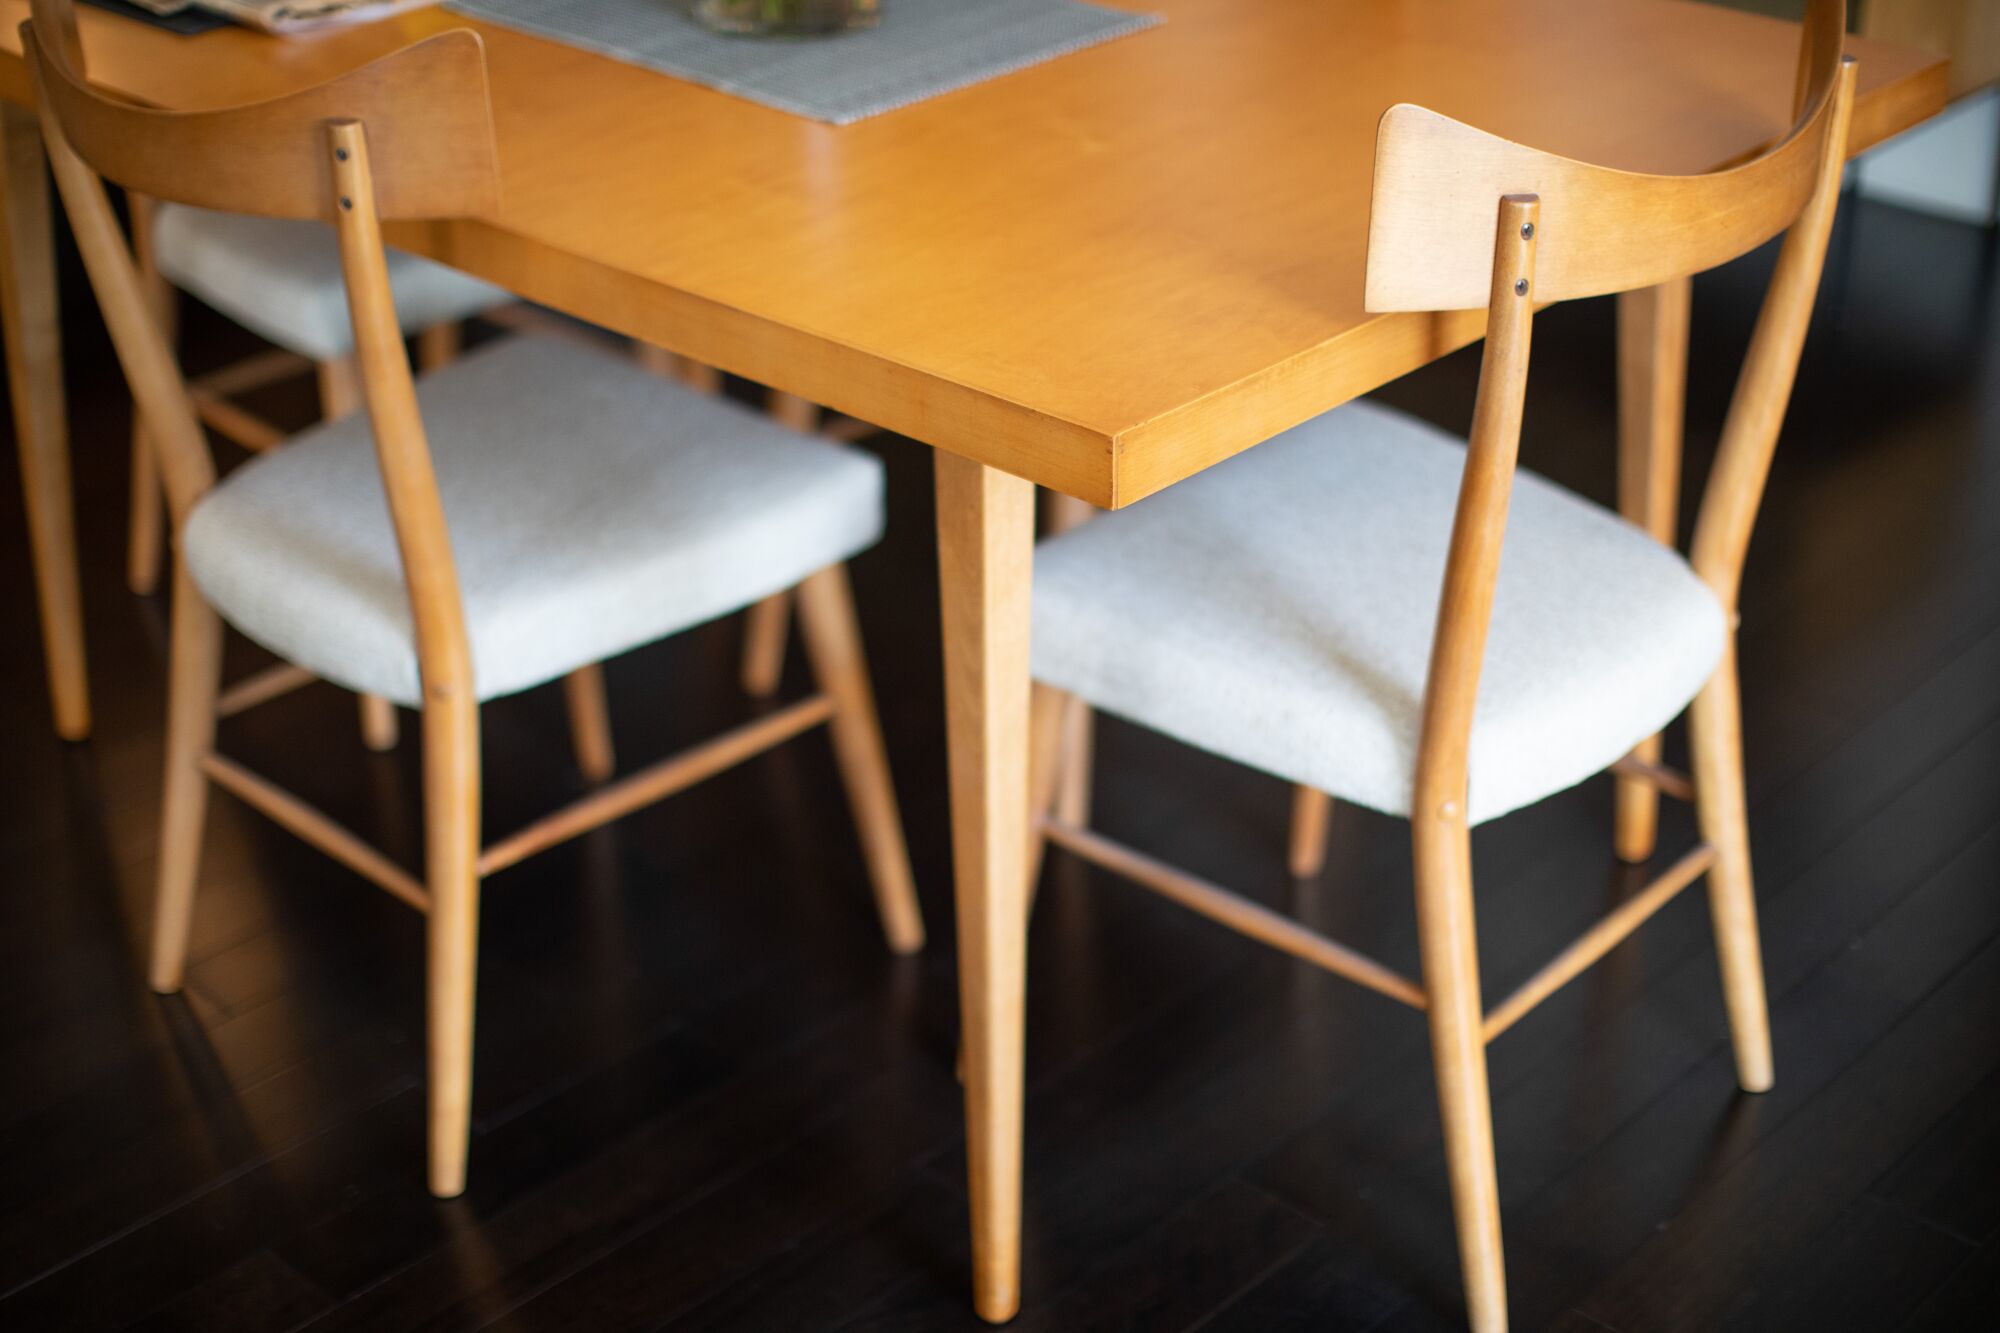 A photo taken at an angle reveals a corner of a wood dining table and curved back dining chairs in the Modernist style